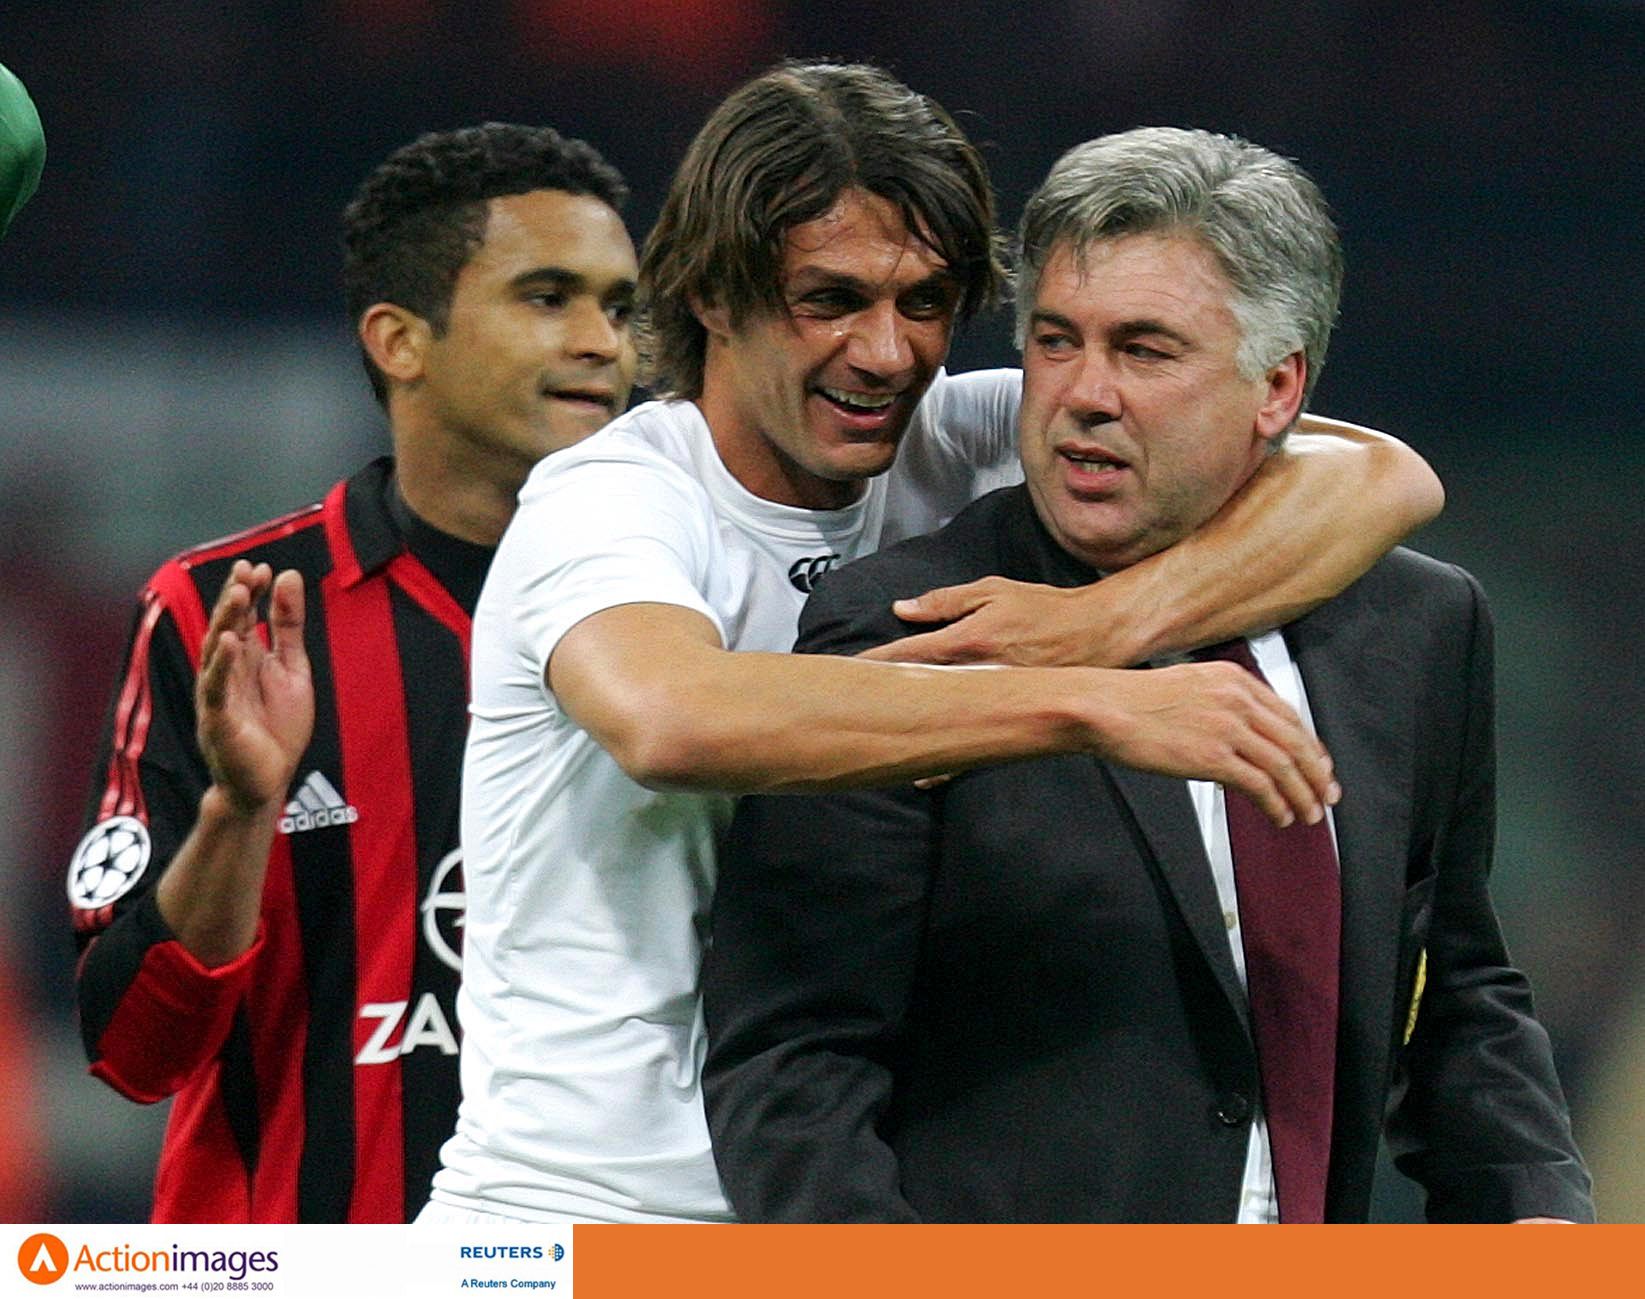 Football - AC Milan v Olympique Lyonnais - UEFA Champions League Quarter Final Second Leg - San Siro Stadium, Milan, Italy - 4/4/06 
AC Milan's Paolo Maldini and manager Carlo Ancelotti at the end of the game 
Mandatory Credit: Action Images / Michael Regan 
Livepic